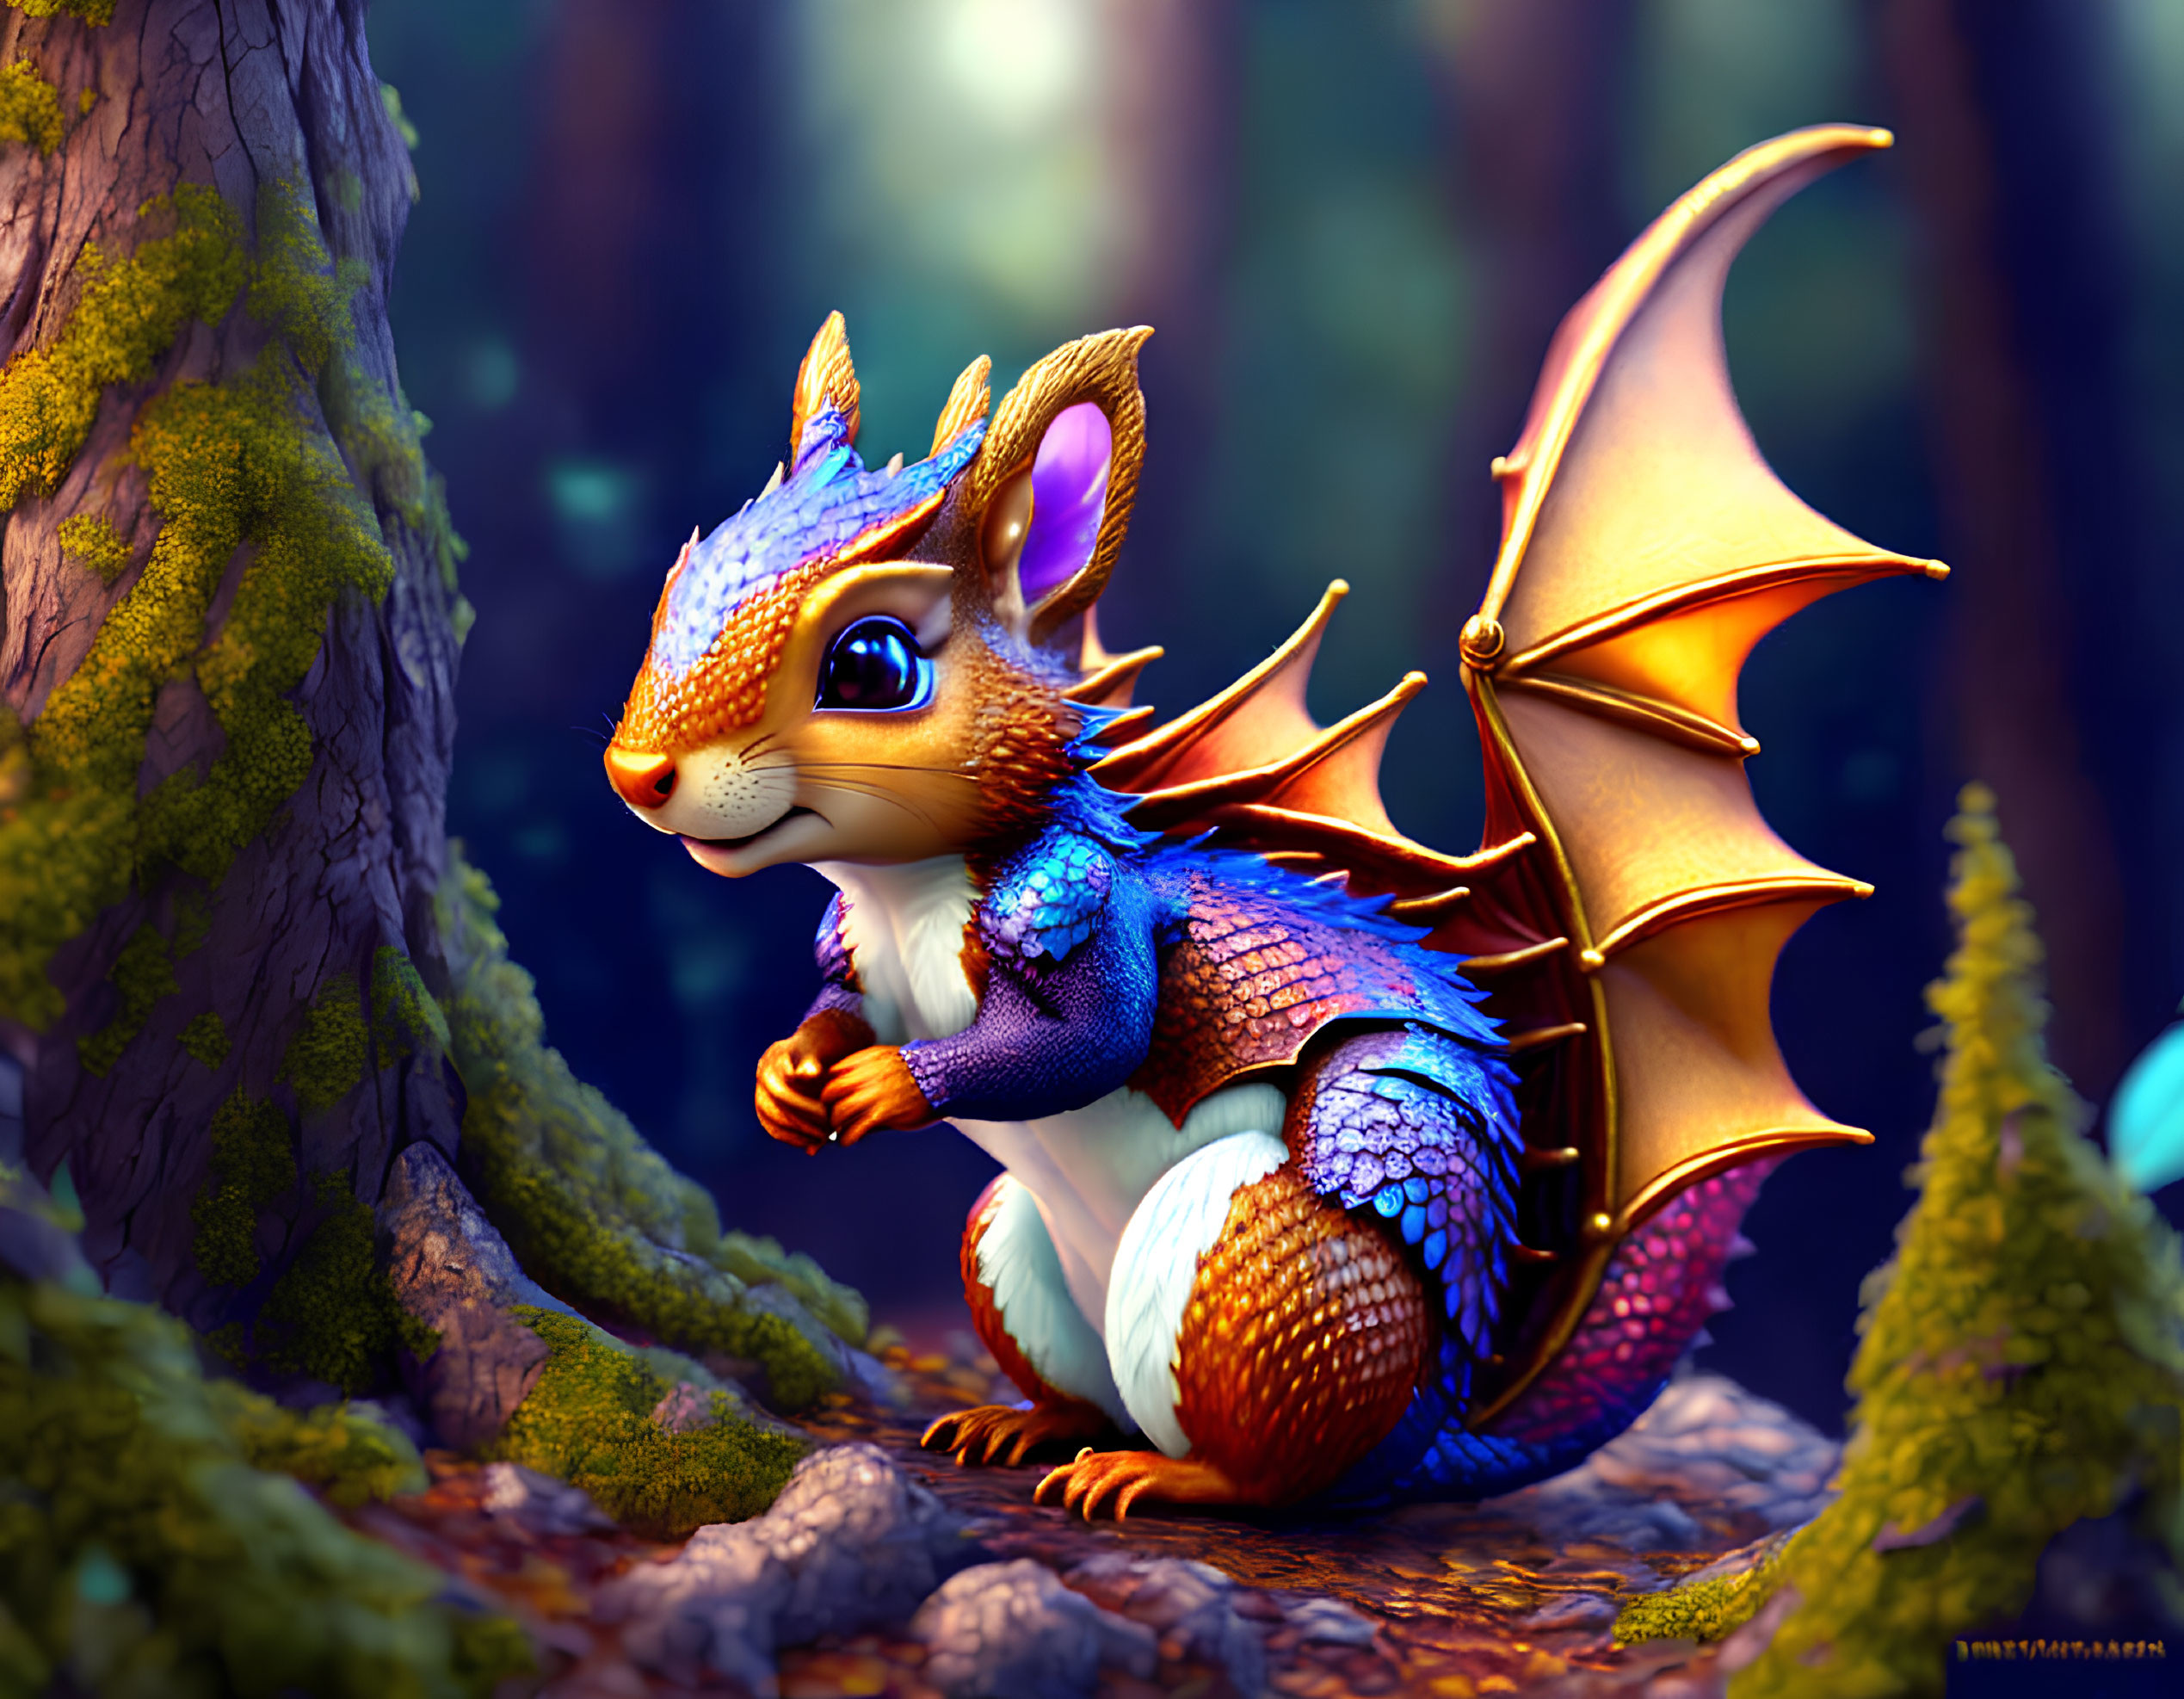 Vibrant dragon-squirrel hybrid in enchanted forest